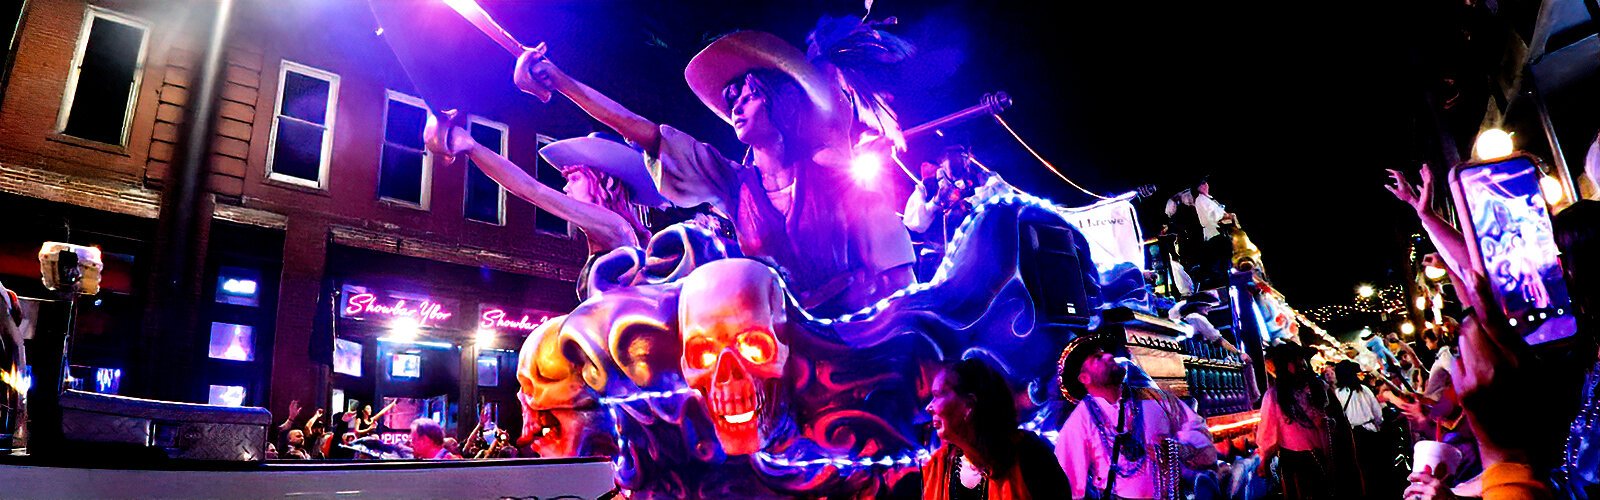 Named for Anne Bonney and Mary Read, the female pirates featured in front of their new float, the Bonney-Read Krewe is a Tampa all-women krewe established in 1994.